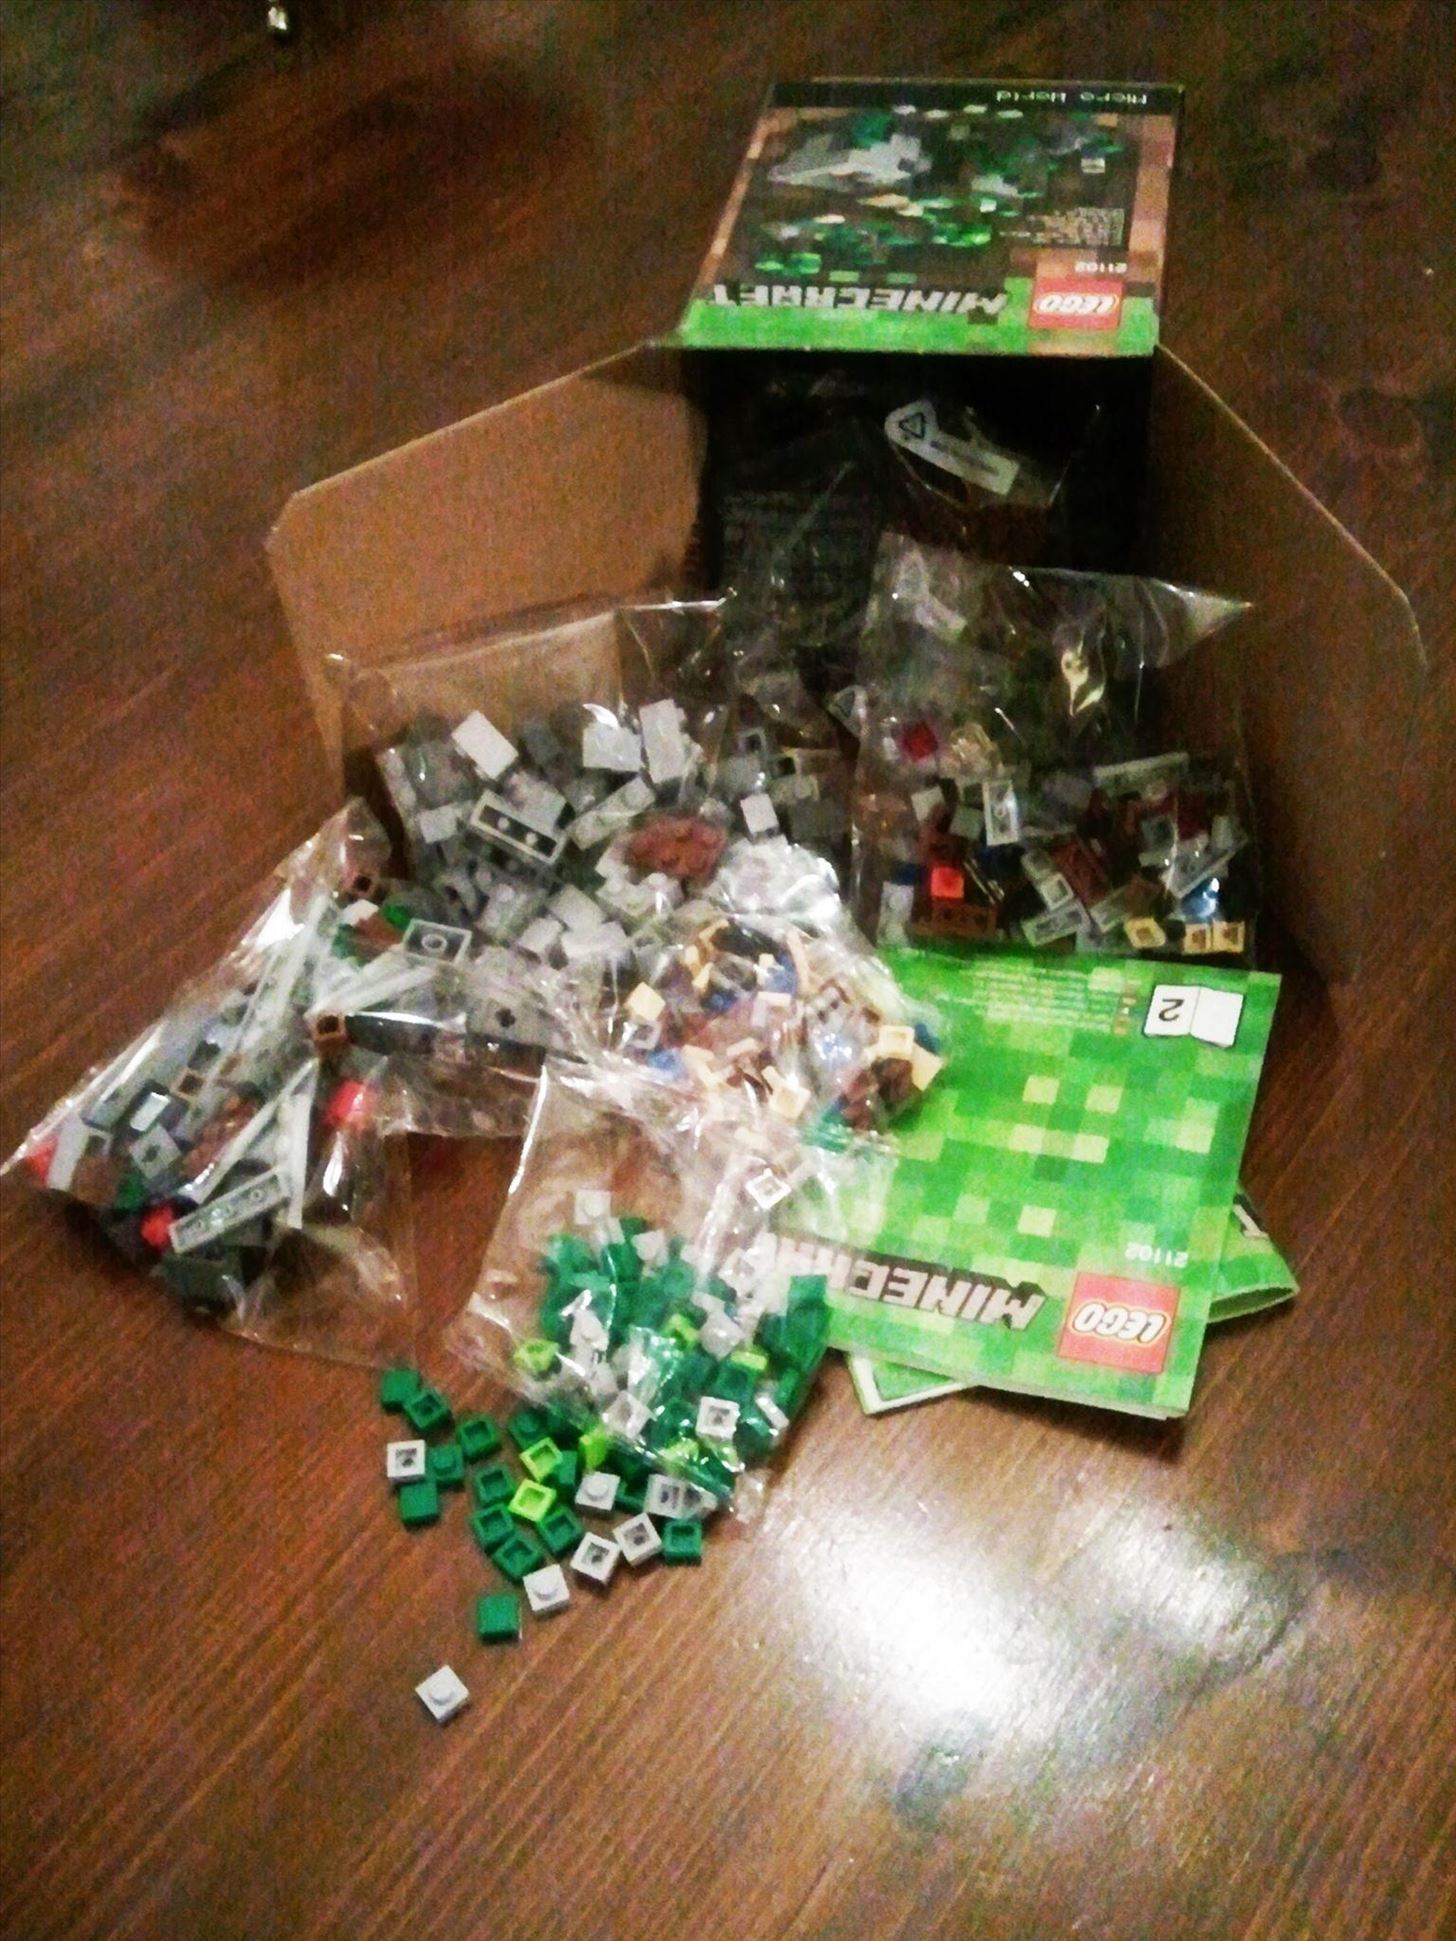 New Minecraft LEGOs for Displaying, Not Playing